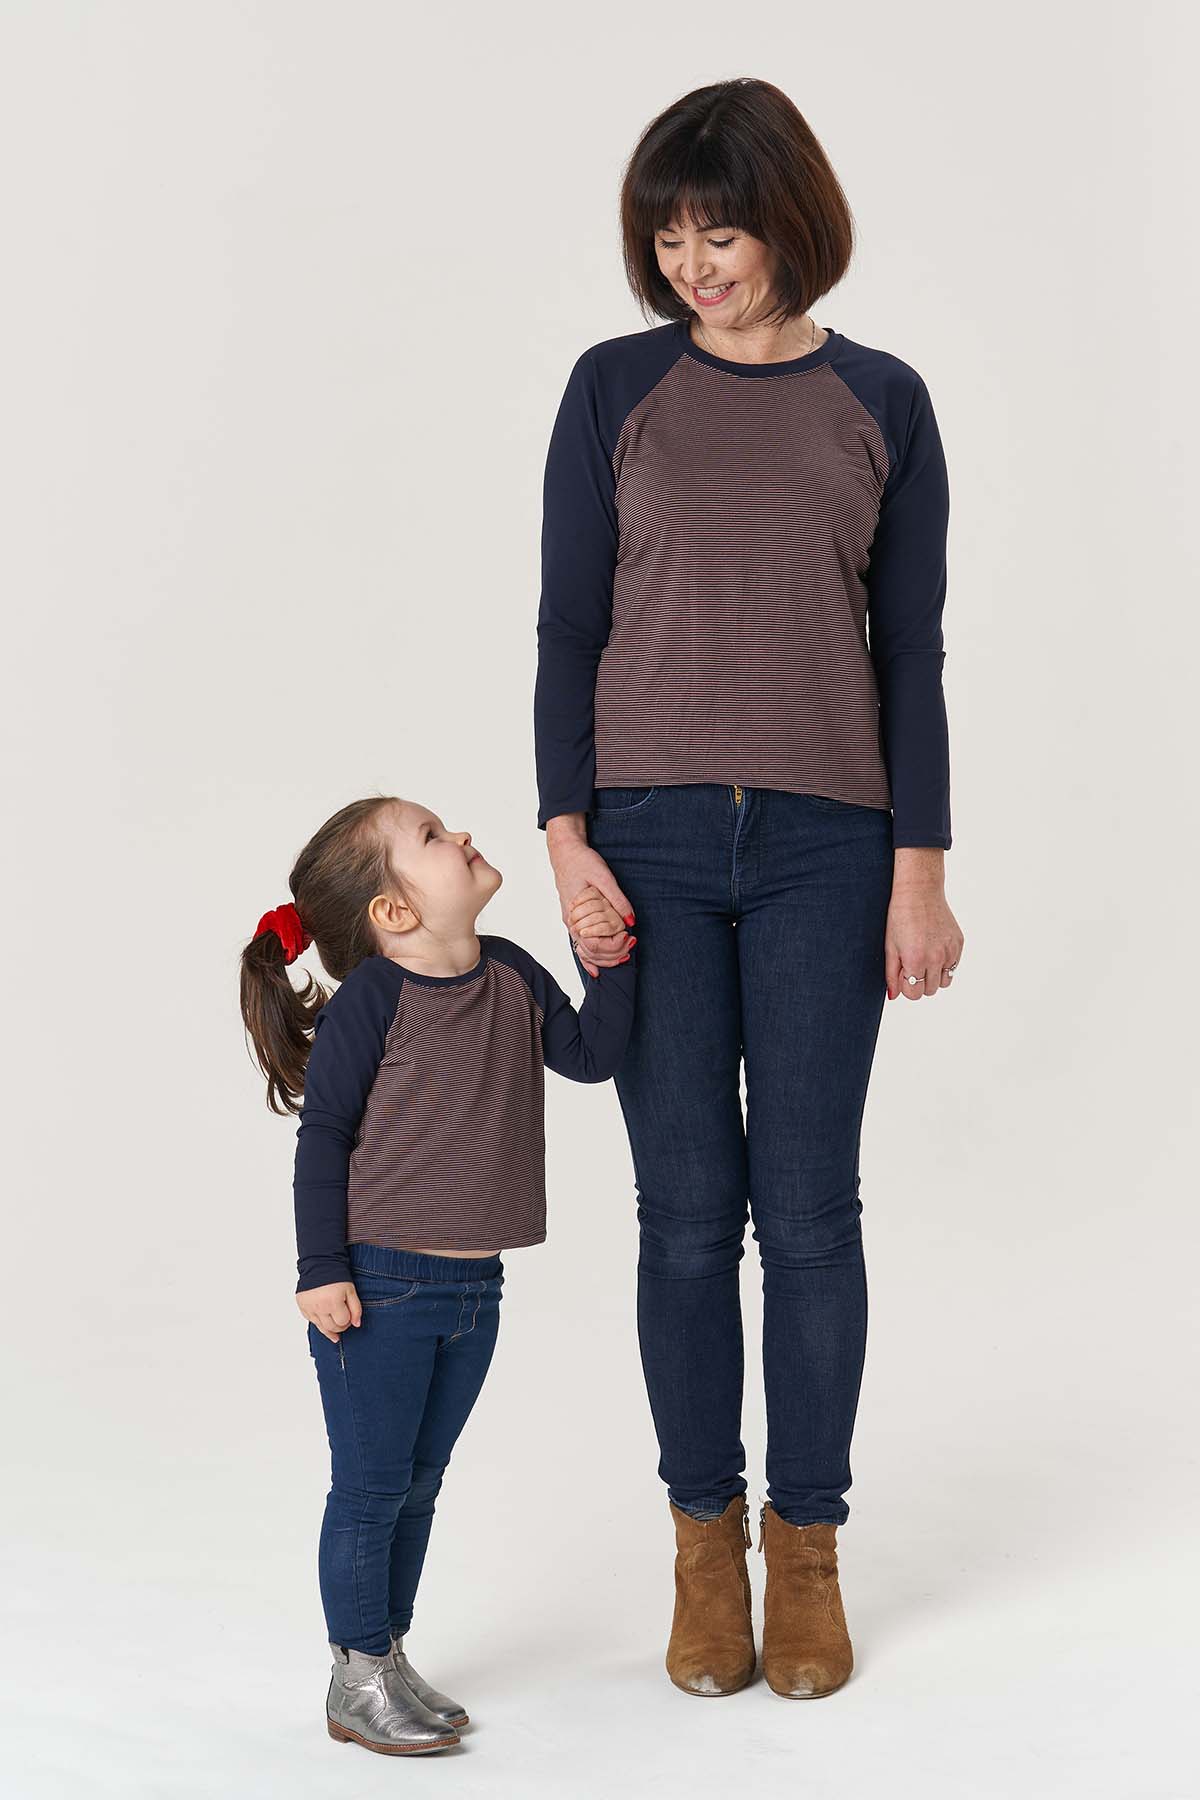 Child wearing the Baby/Child Mini Hebden T-shirt sewing pattern from Poppy & Jazz on The Fold Line. A T-shirt pattern made in cotton, viscose, tencel or bamboo jersey fabrics, featuring raglan full length sleeves, neckband and contrasting fabrics.